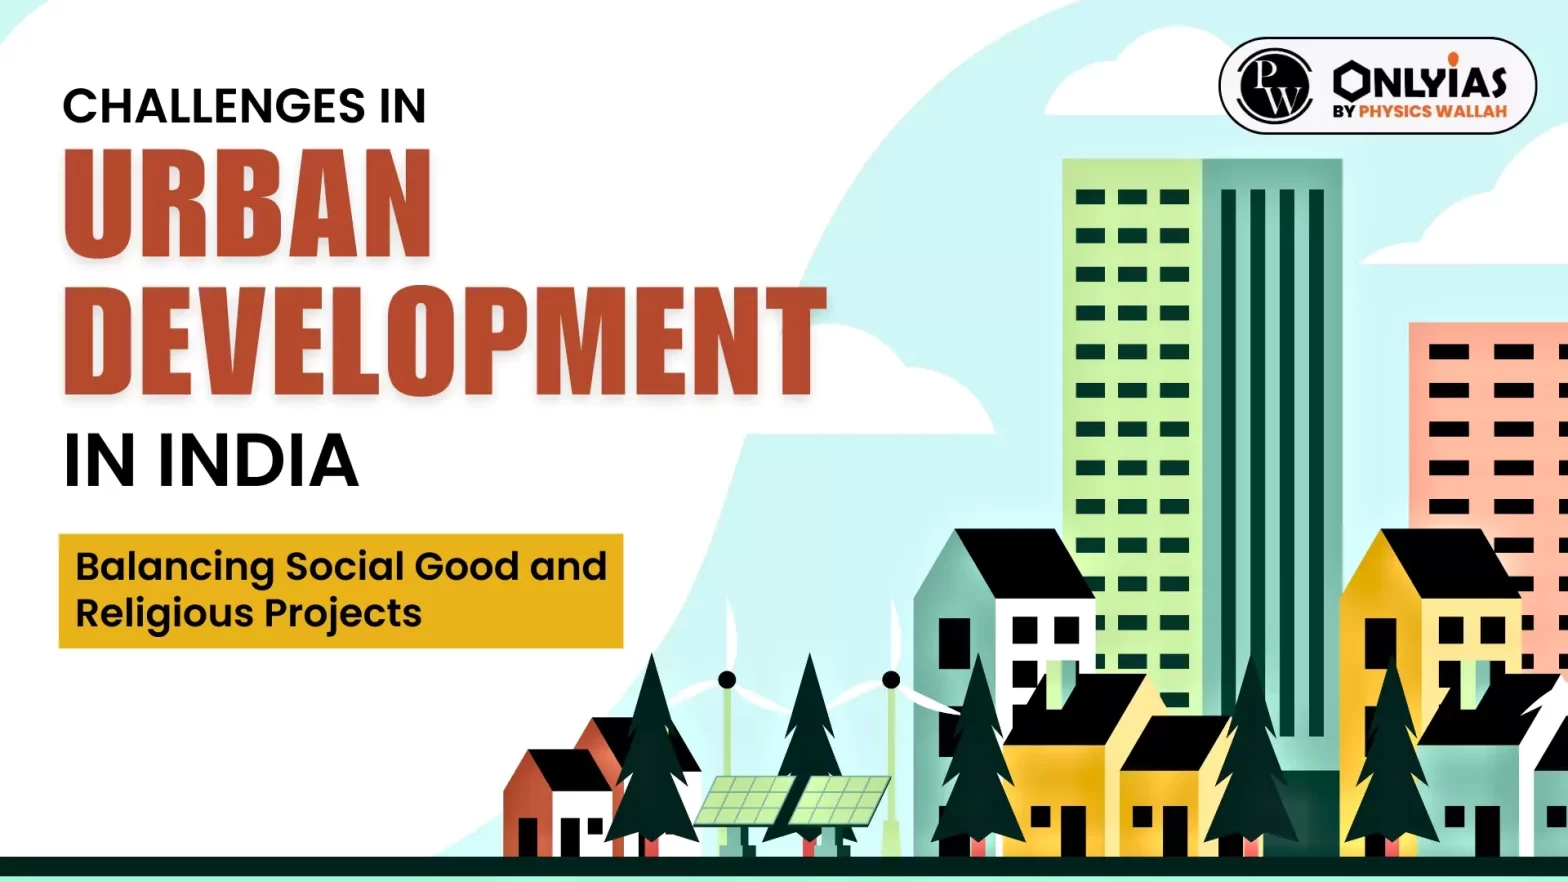 Challenges in Urban Development in India: Balancing Social Good and Religious Projects